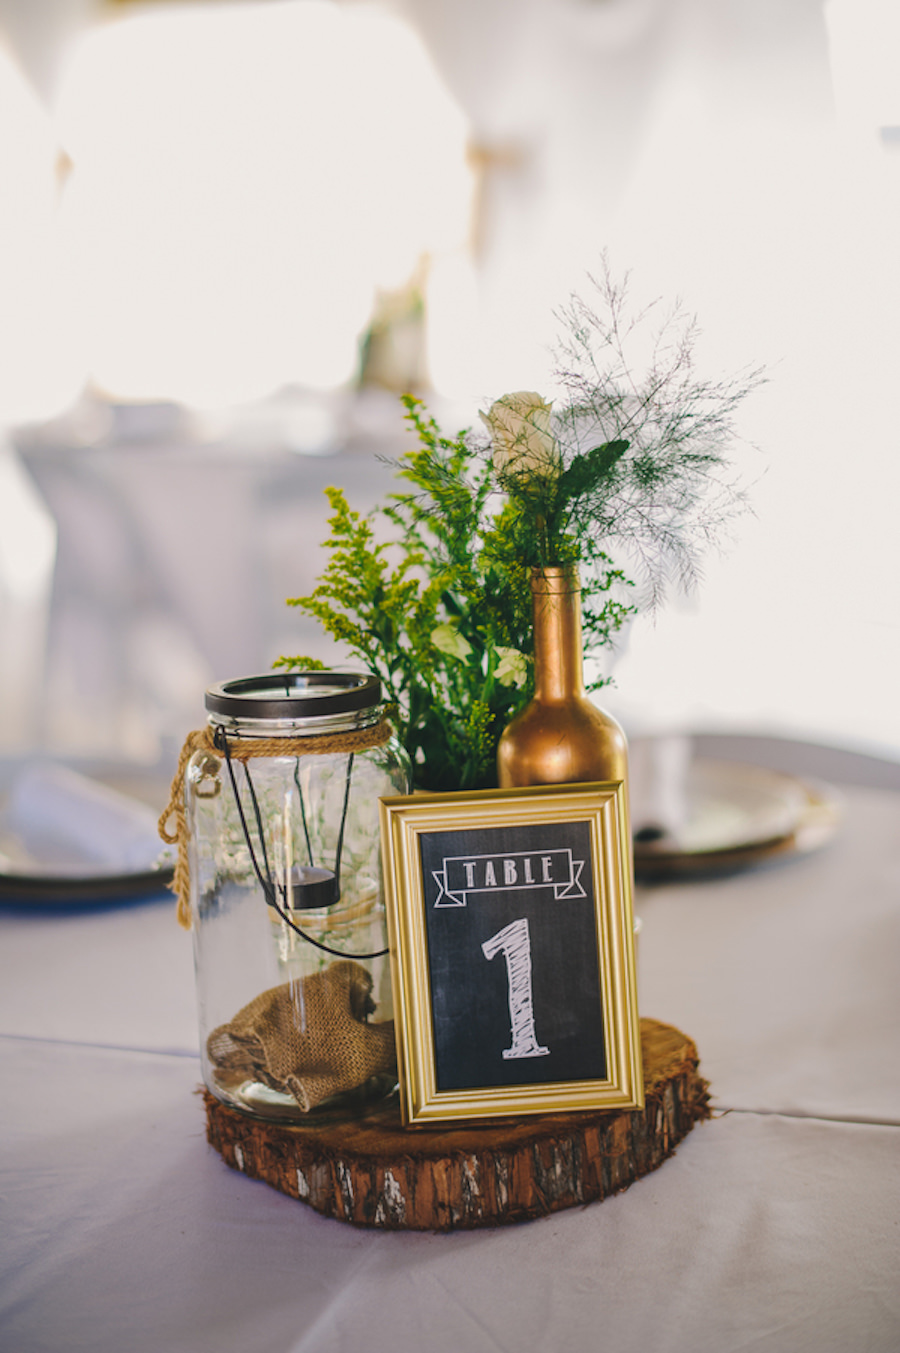 Rustic Barn Wedding Reception Table Decor with Wooden Slab Centerpieces, White Centerpieces, Painted Wine Bottles, Mason Jars, and Candles